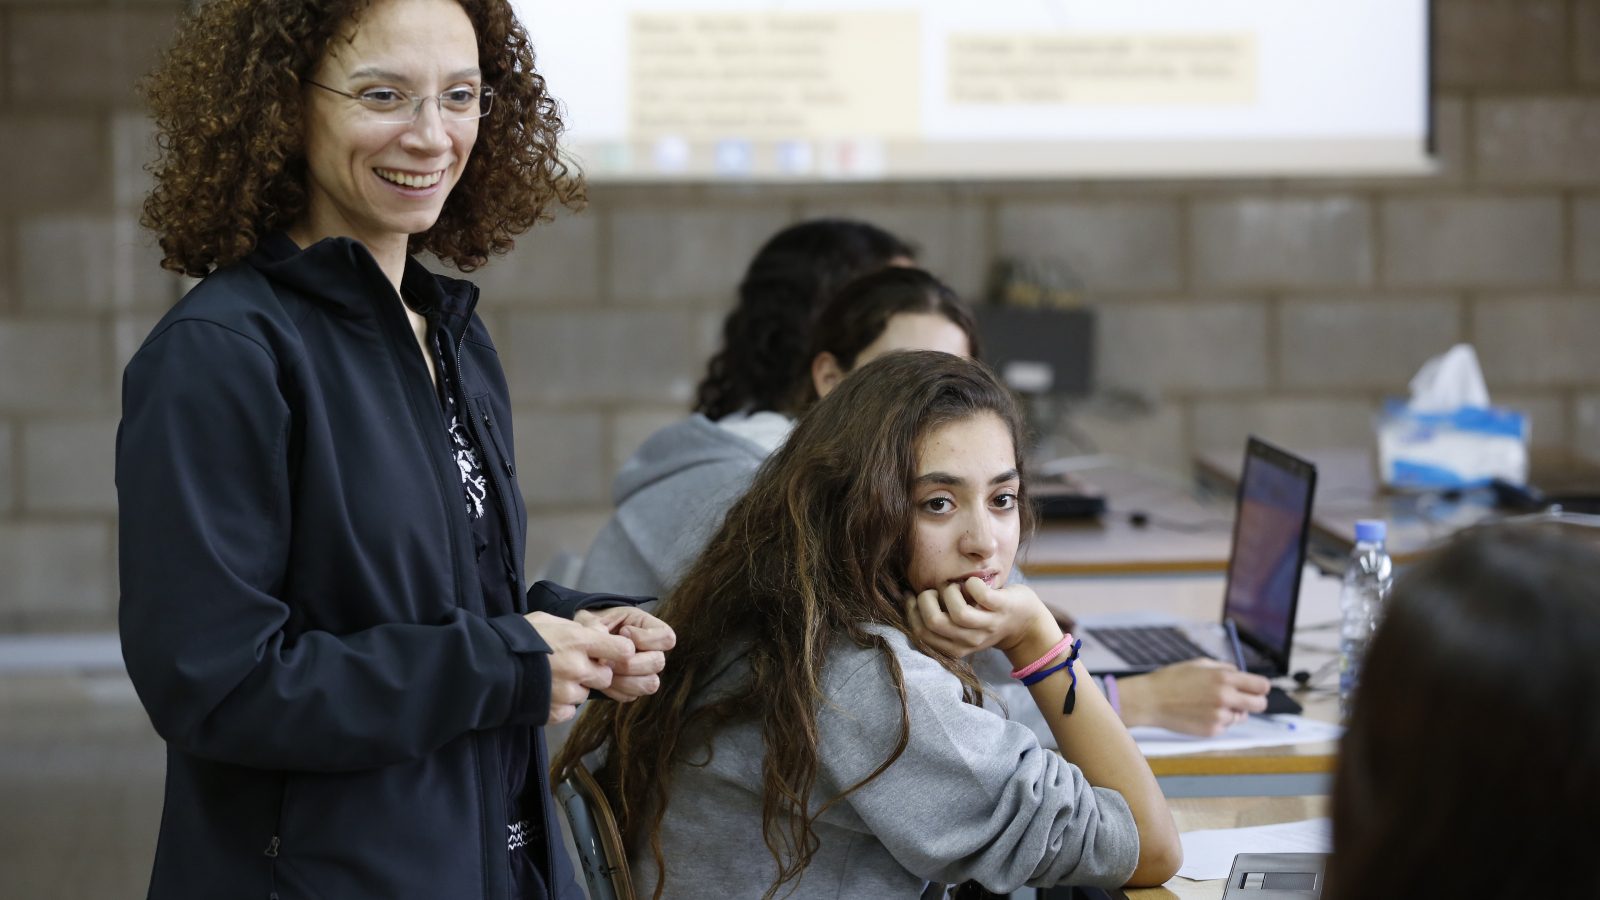 Lebanese teacher Lynn Sakr chats with students during a Media and Information Literacy (MIL) class at the school of Jesus and Mary in the Rabweh area, northeast of Beirut, Lebanon.